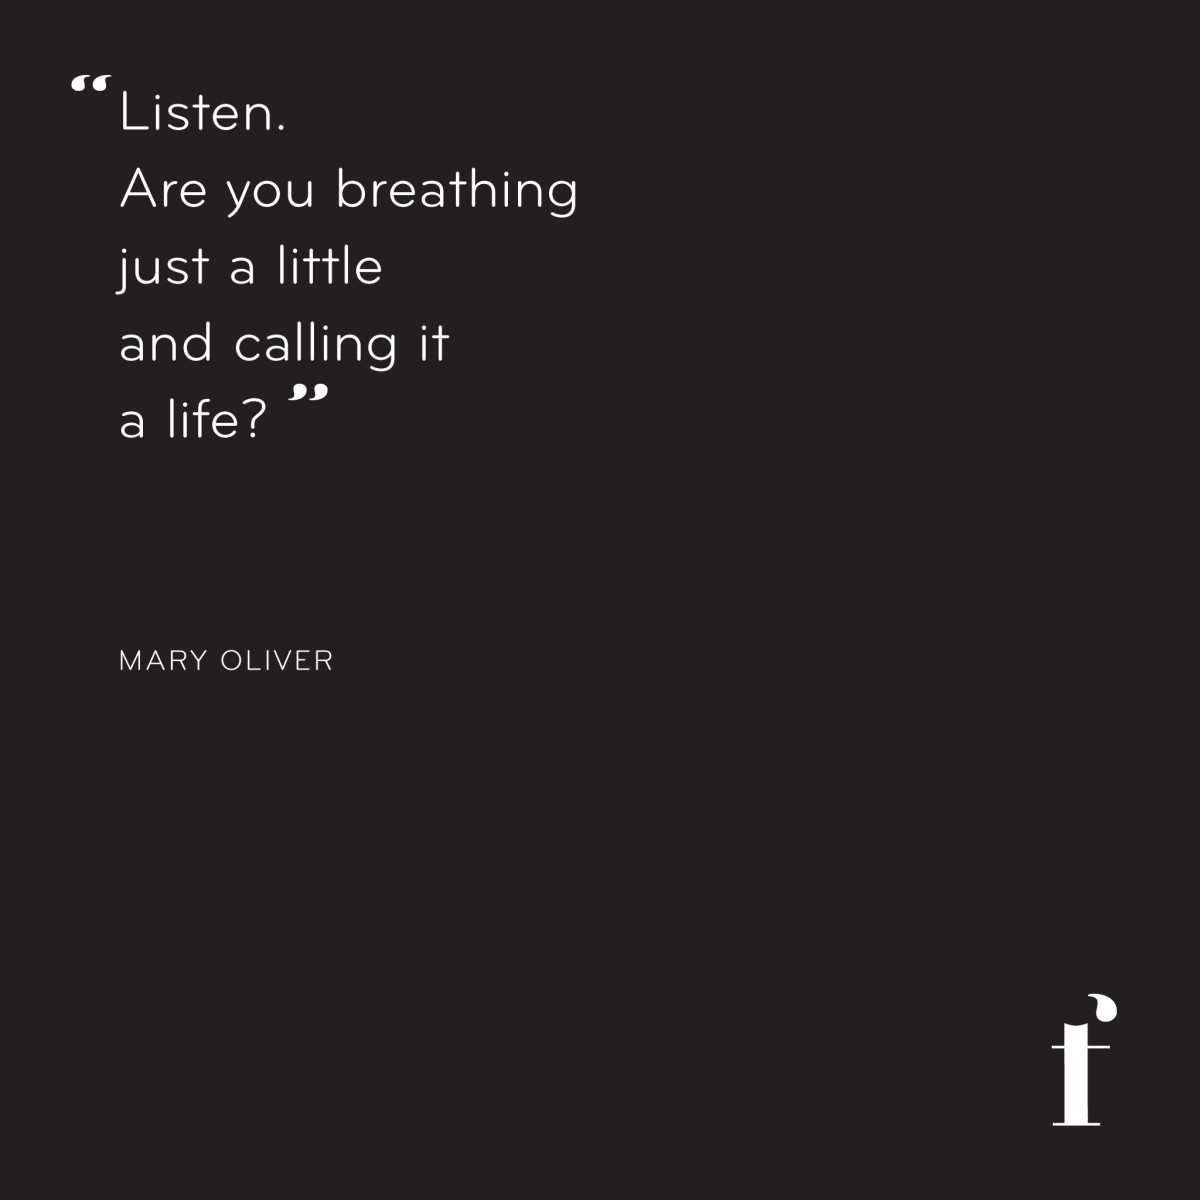 MARYOLIVER